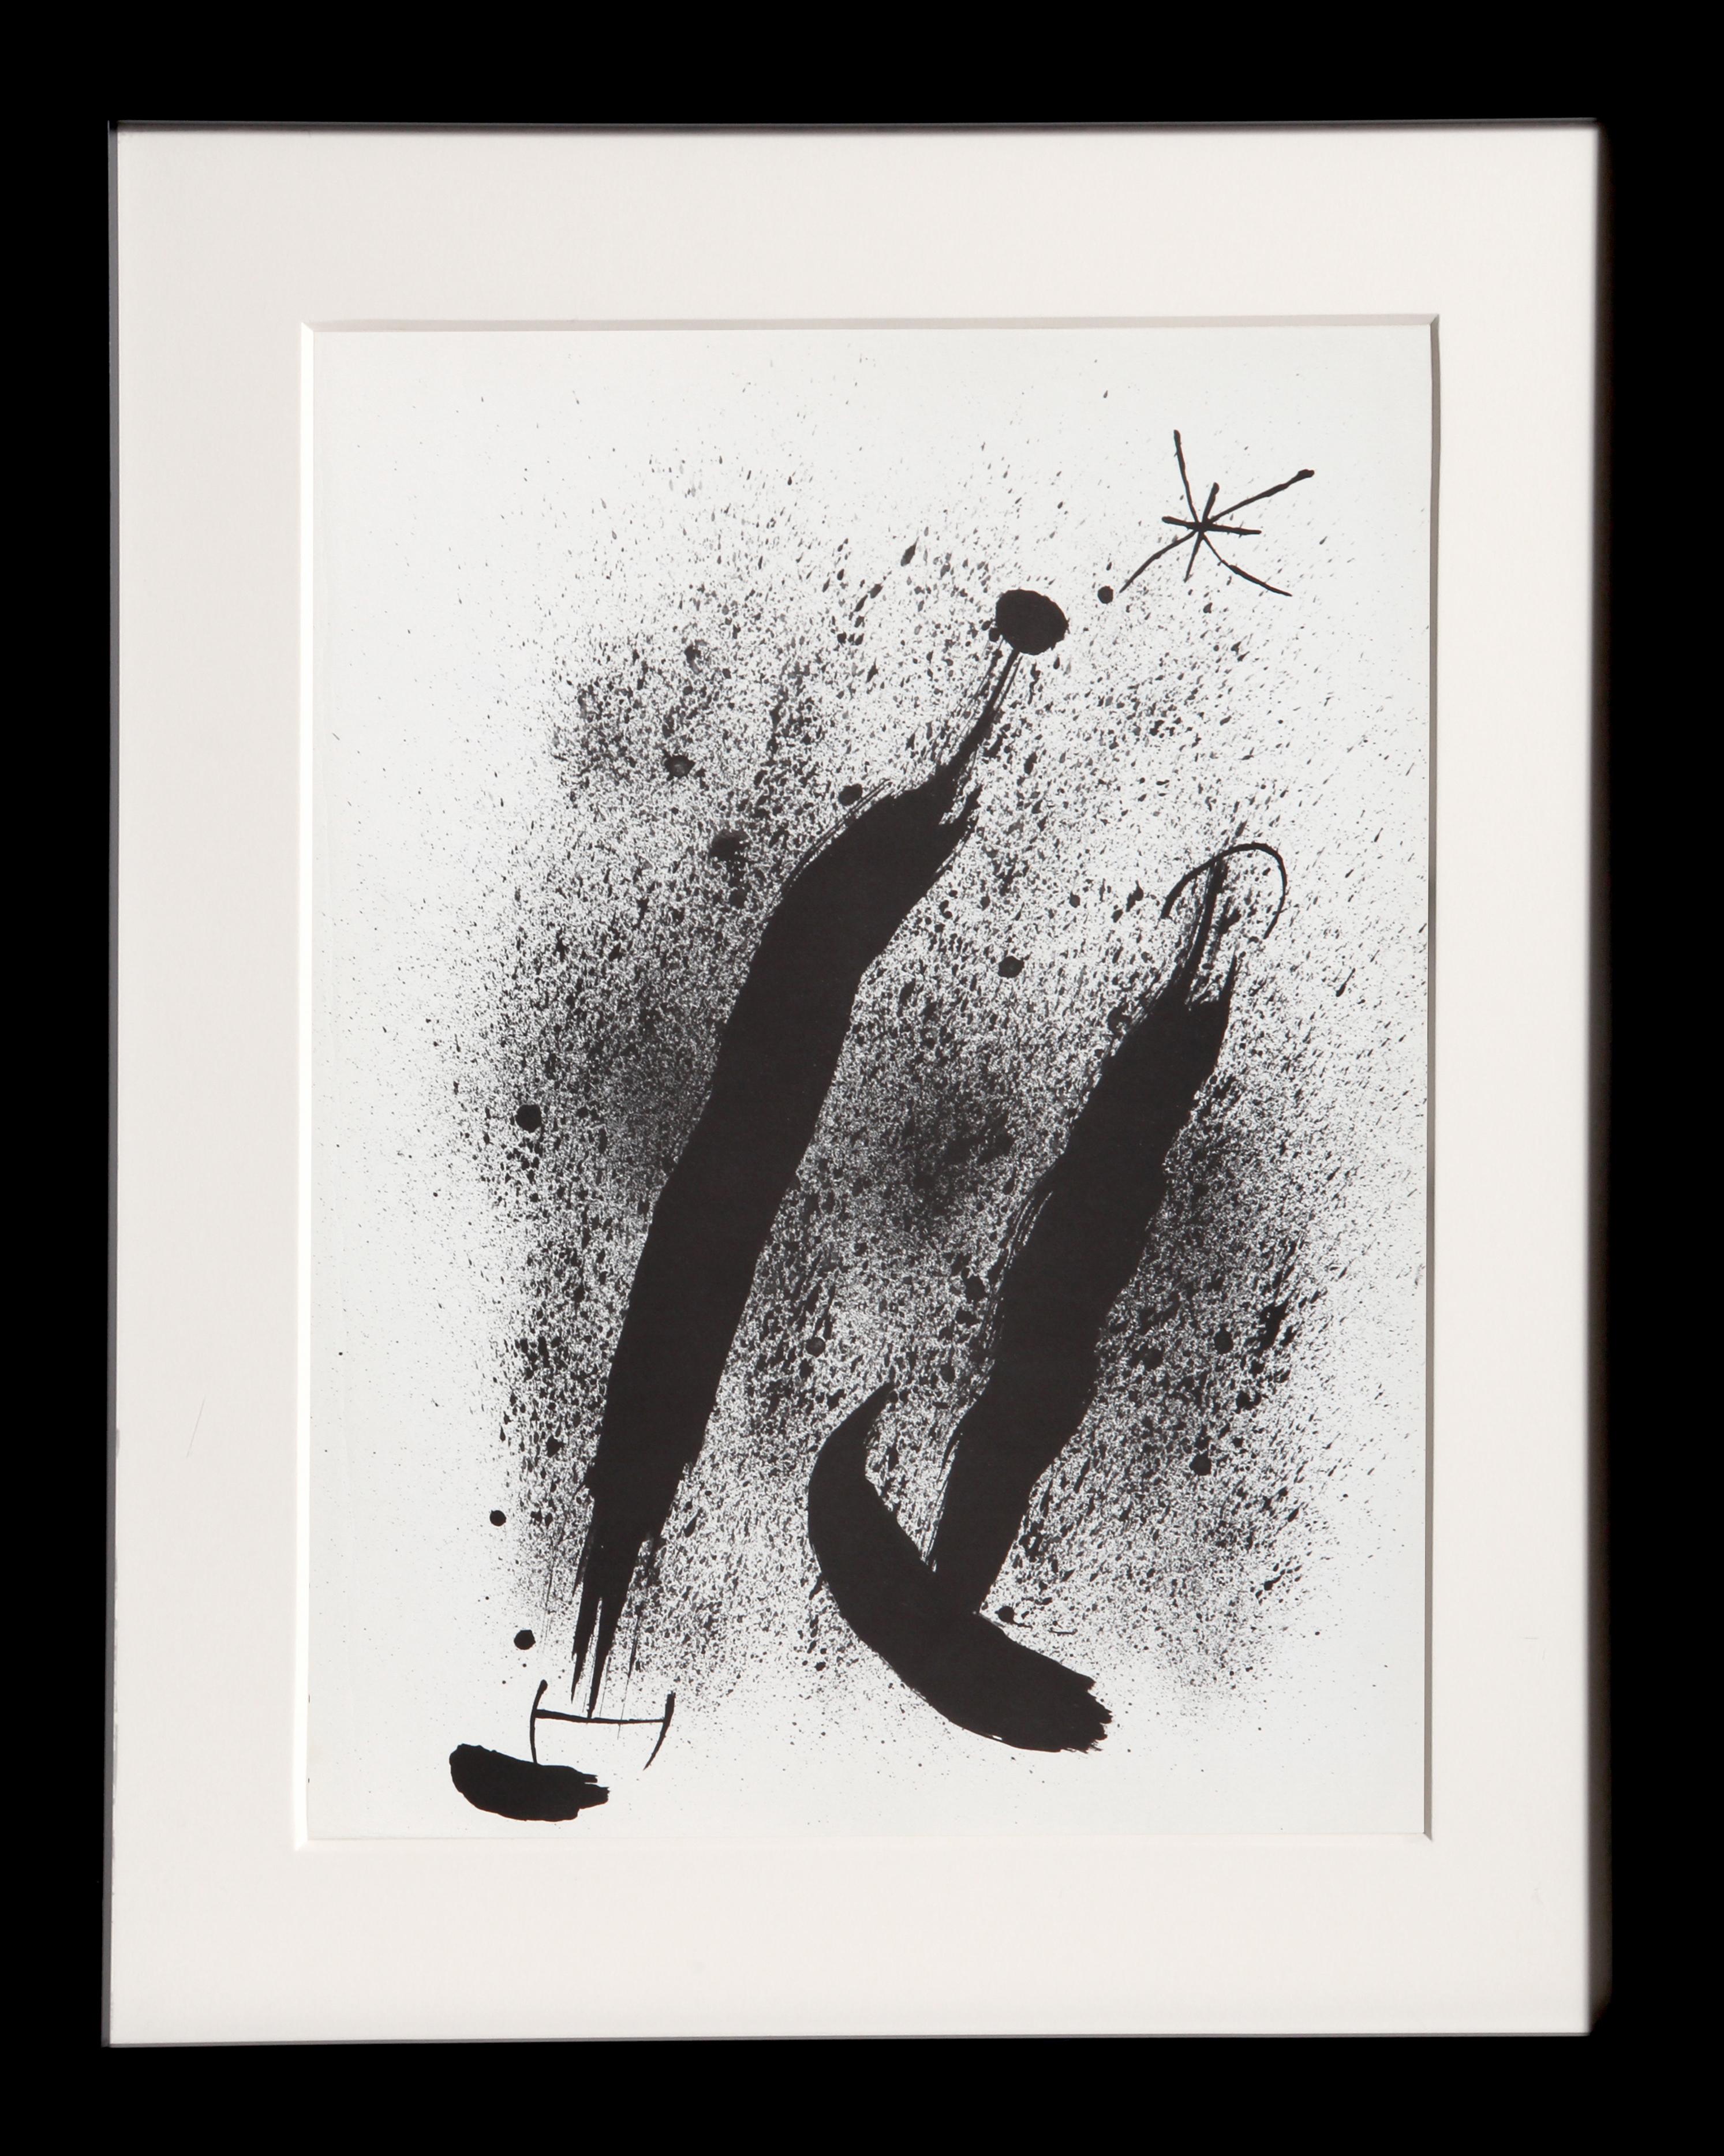 Artist: Joan Miro, Spanish (1893 - 1983)
Title: Les Essencies de la Terra 8
Year: 1968
Medium: Lithograph on Guarro
Edition: LX (60)
Size: 19.25 x 15.25 in. (48.9 x 38.74 cm)

Reference: no. 123 in Cramer "The Illustrated Books", page 314
Colophon